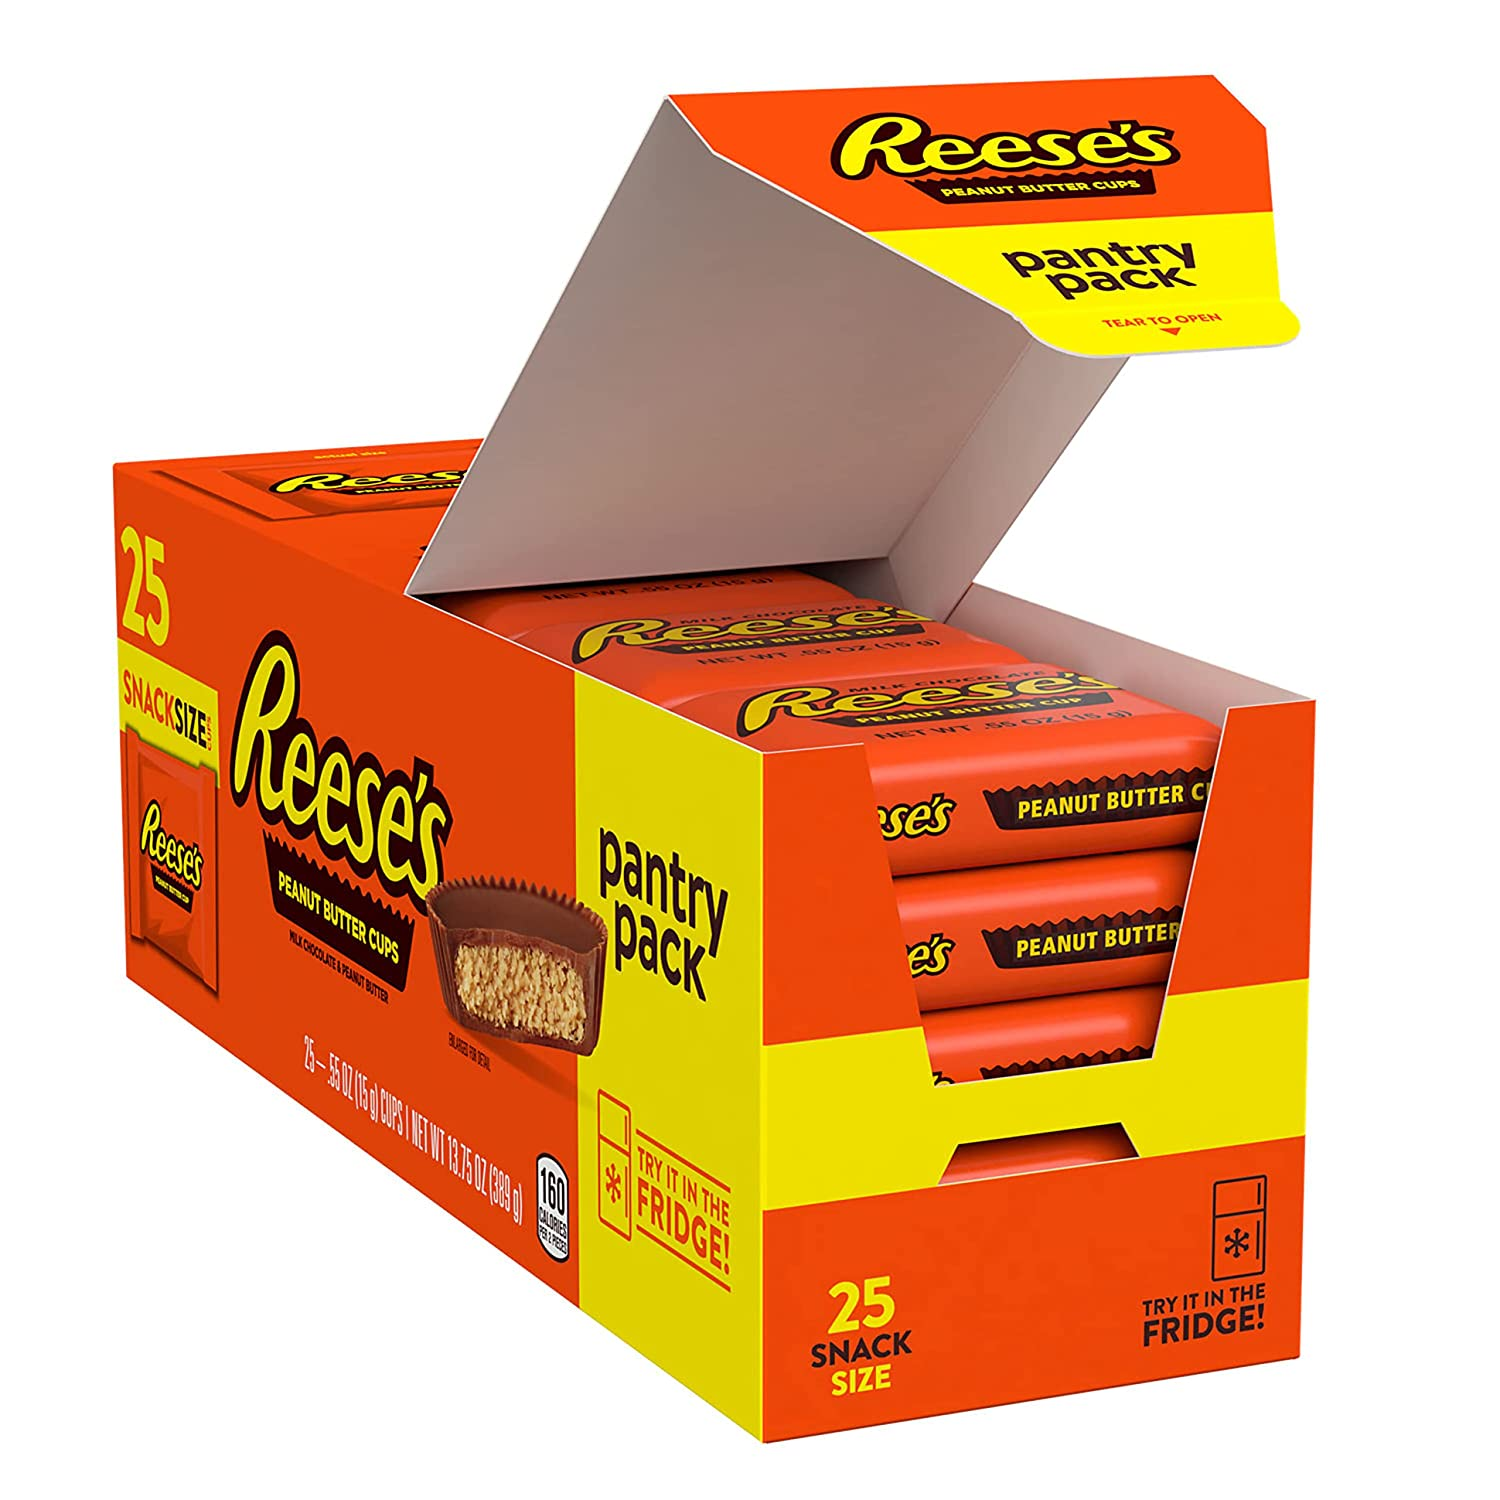 REESE'S Milk Chocolate Peanut Butter Cups 13.75 oz (25 Pieces) $5.88 at Amazon